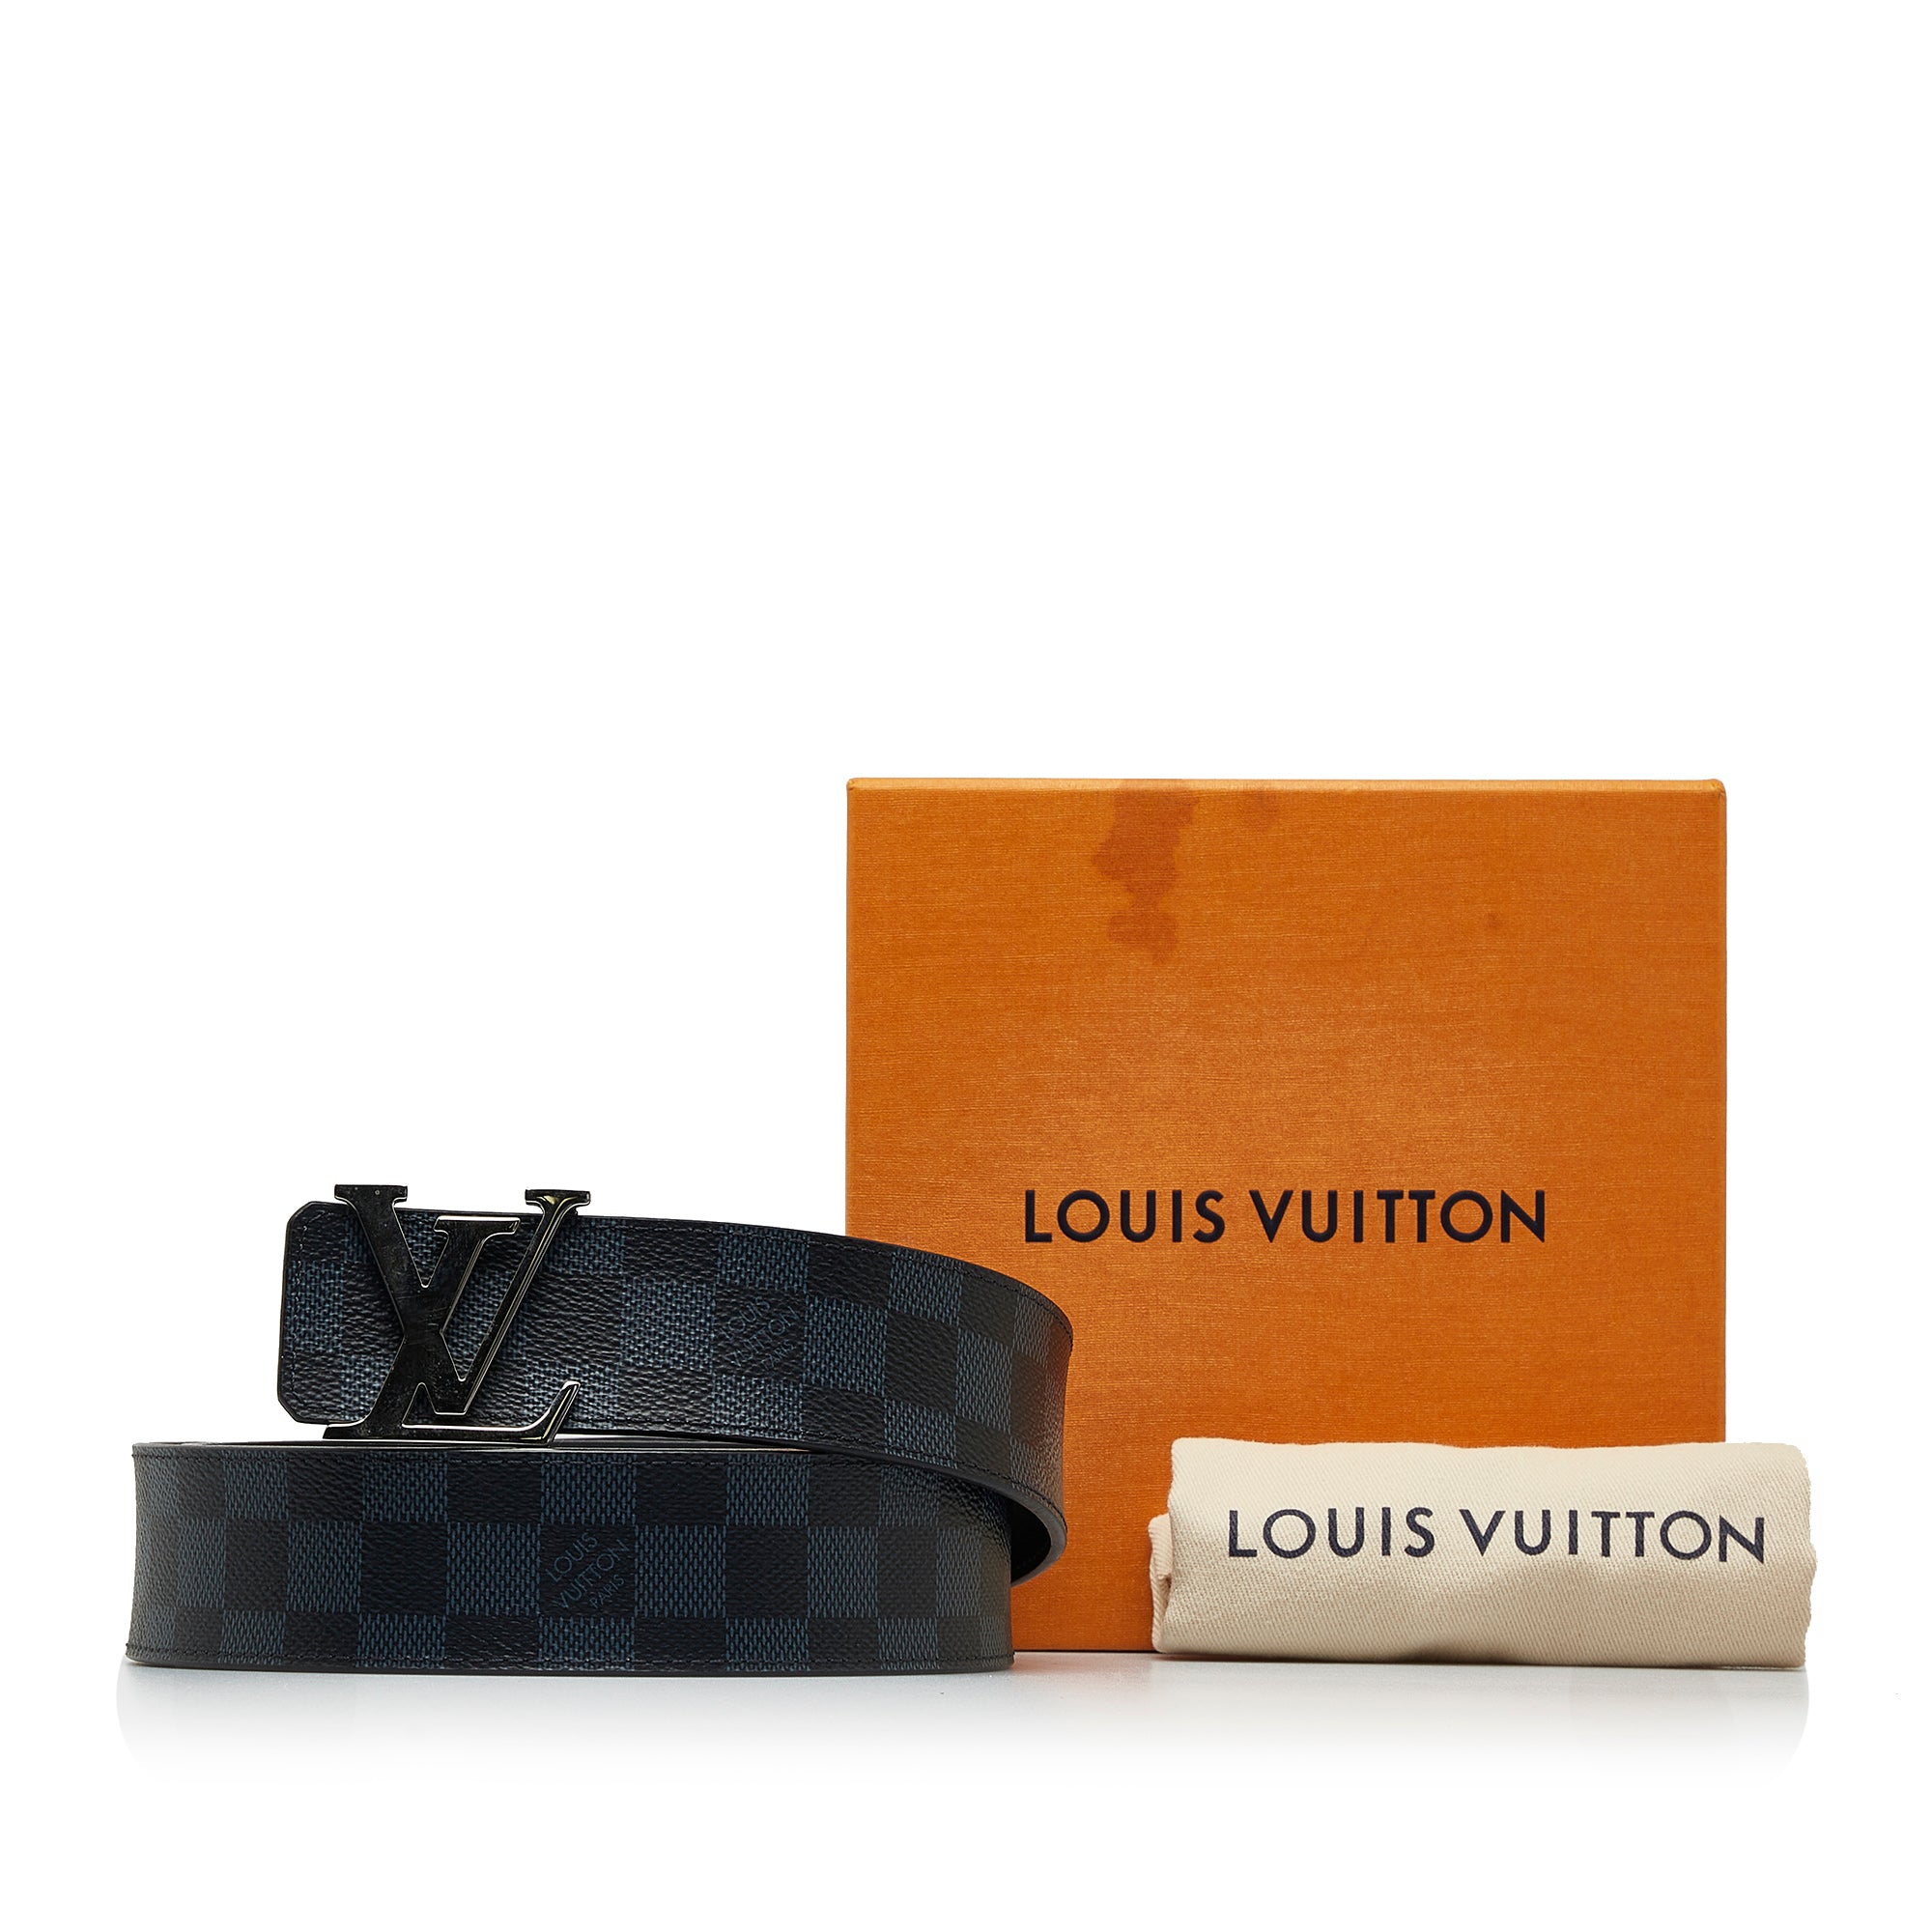 Louis Vuitton - Authenticated Belt - Patent Leather Black for Men, Very Good Condition